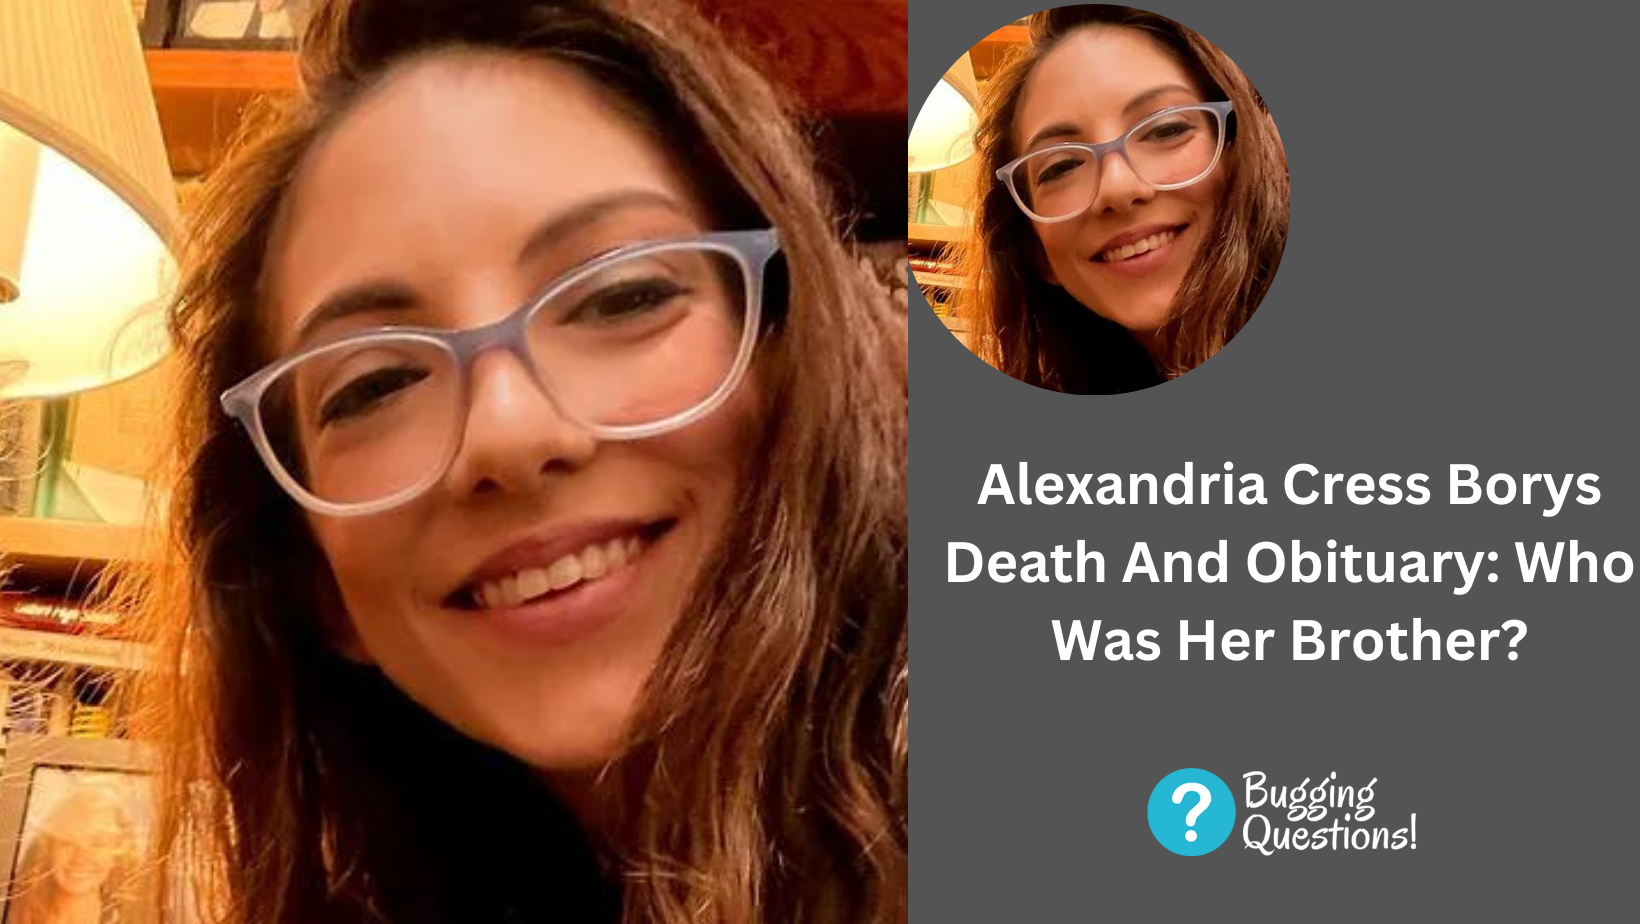 Alexandria Cress Borys Death And Obituary: Who Was Her Brother?